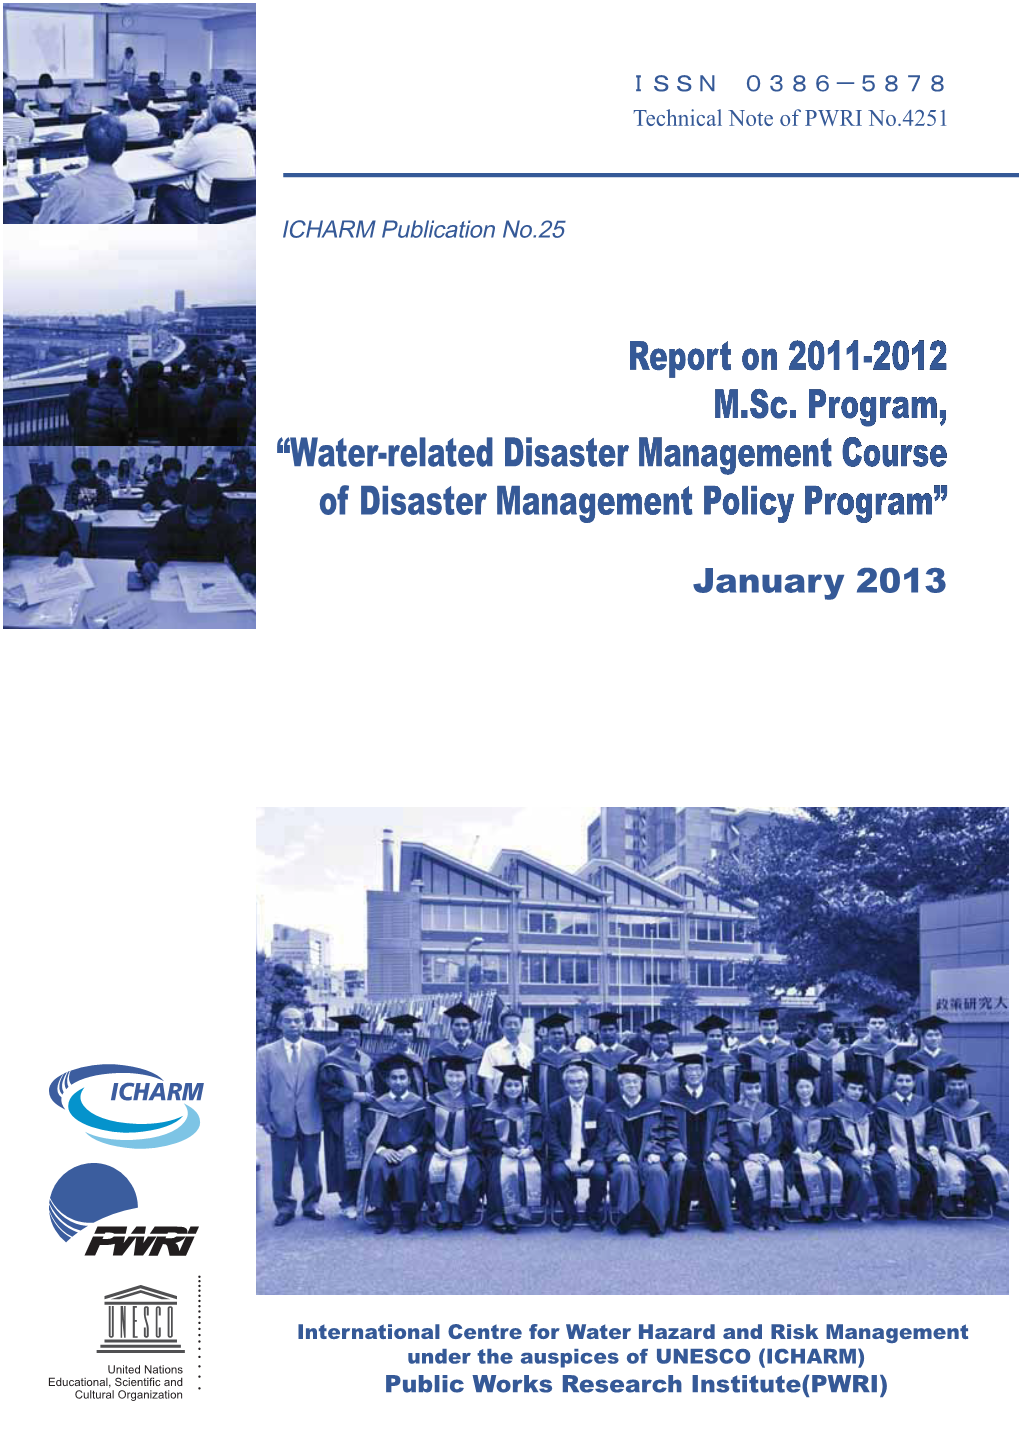 Report on 2011-2012 M.Sc. Program, “Water-Related Disaster Management Course of Disaster Management Policy Program”